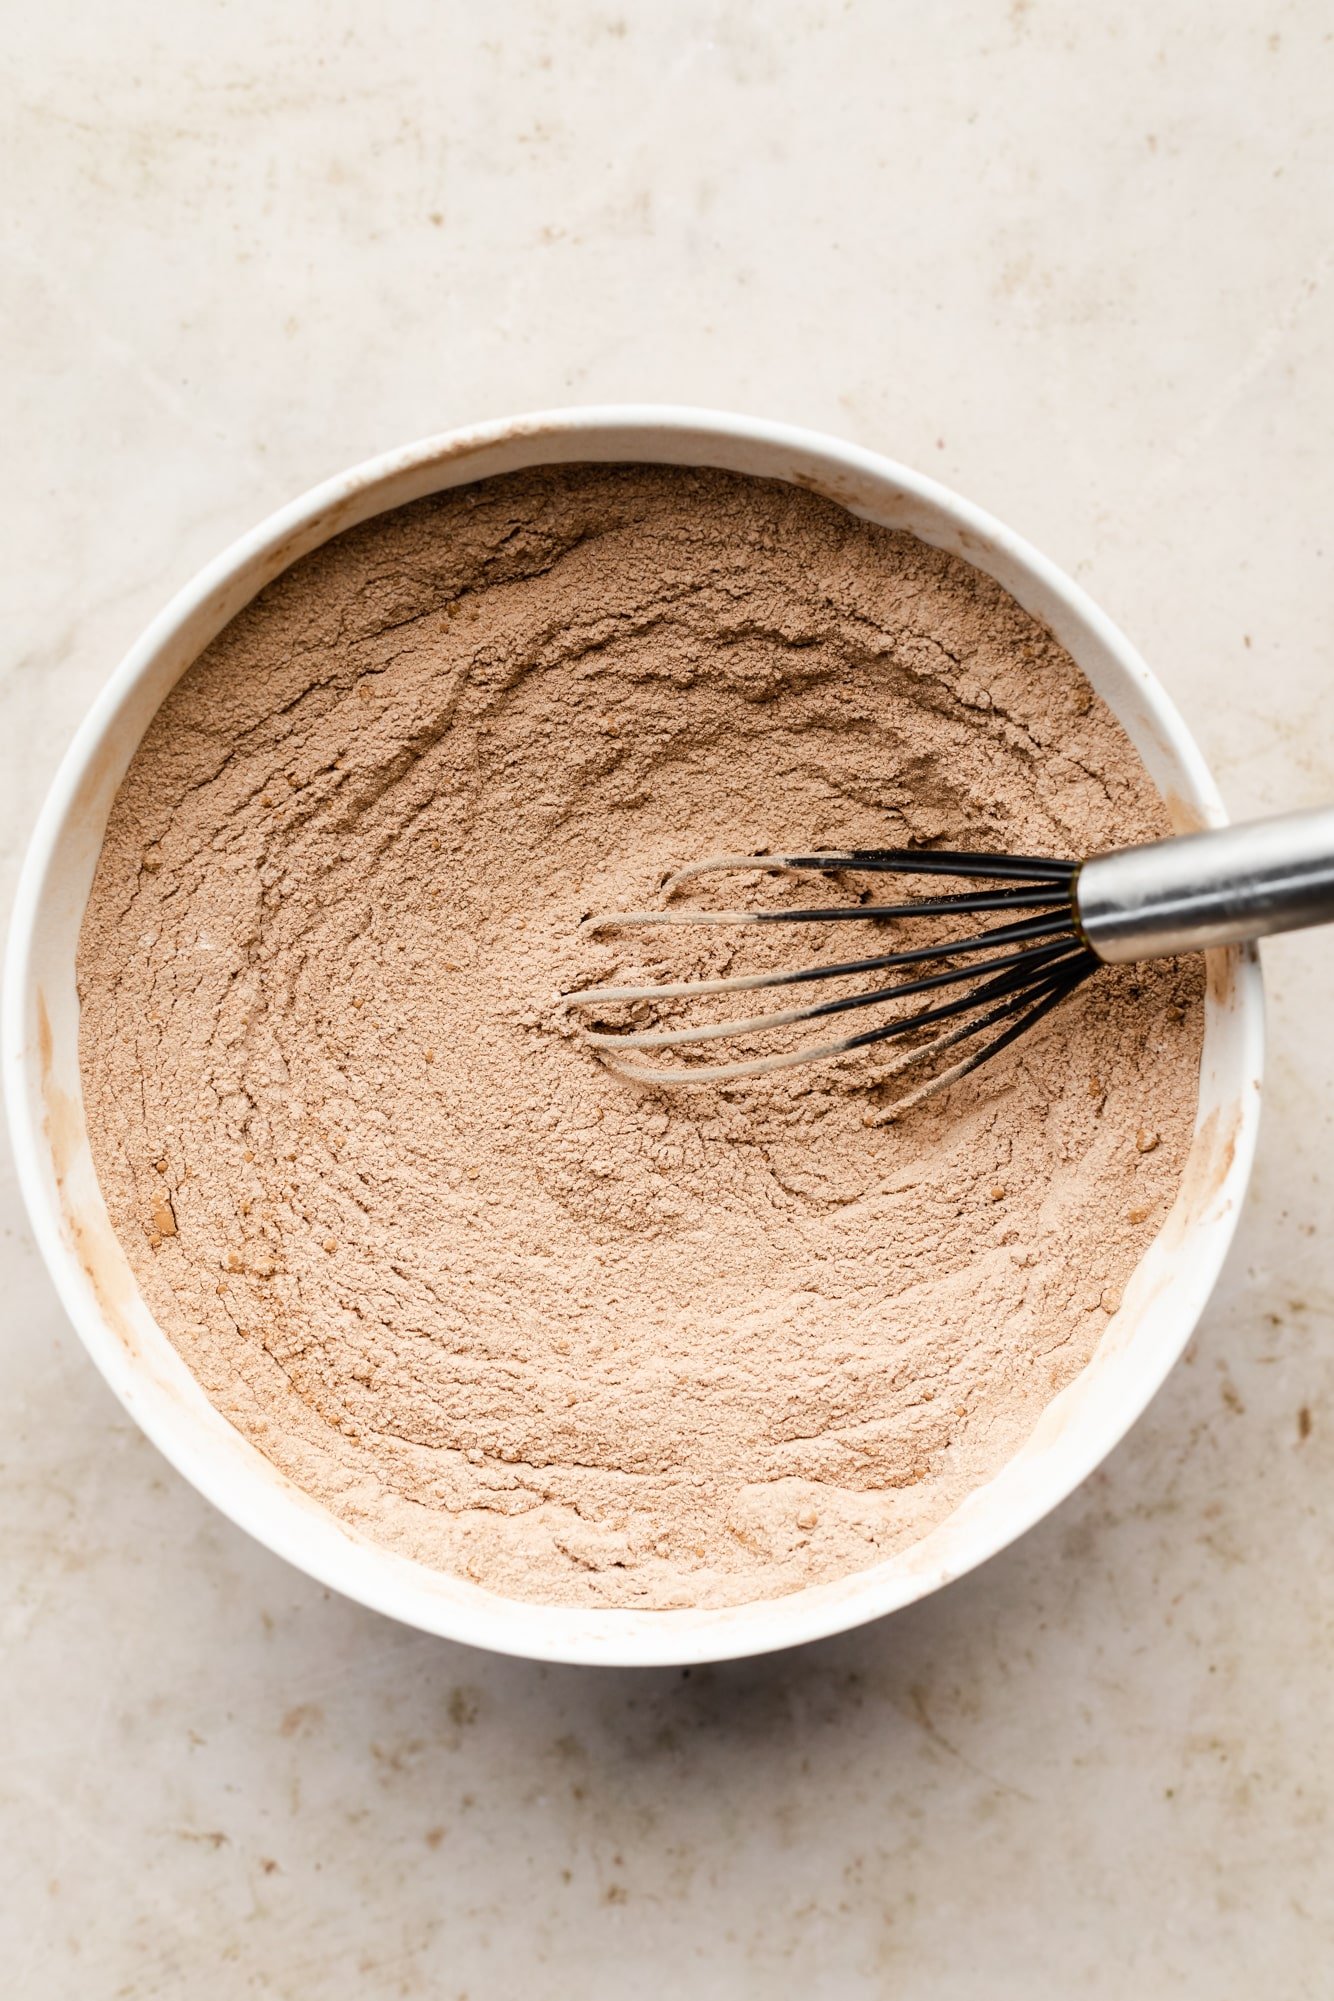 dry chocolate cake mix and a whisk in a large white bowl.